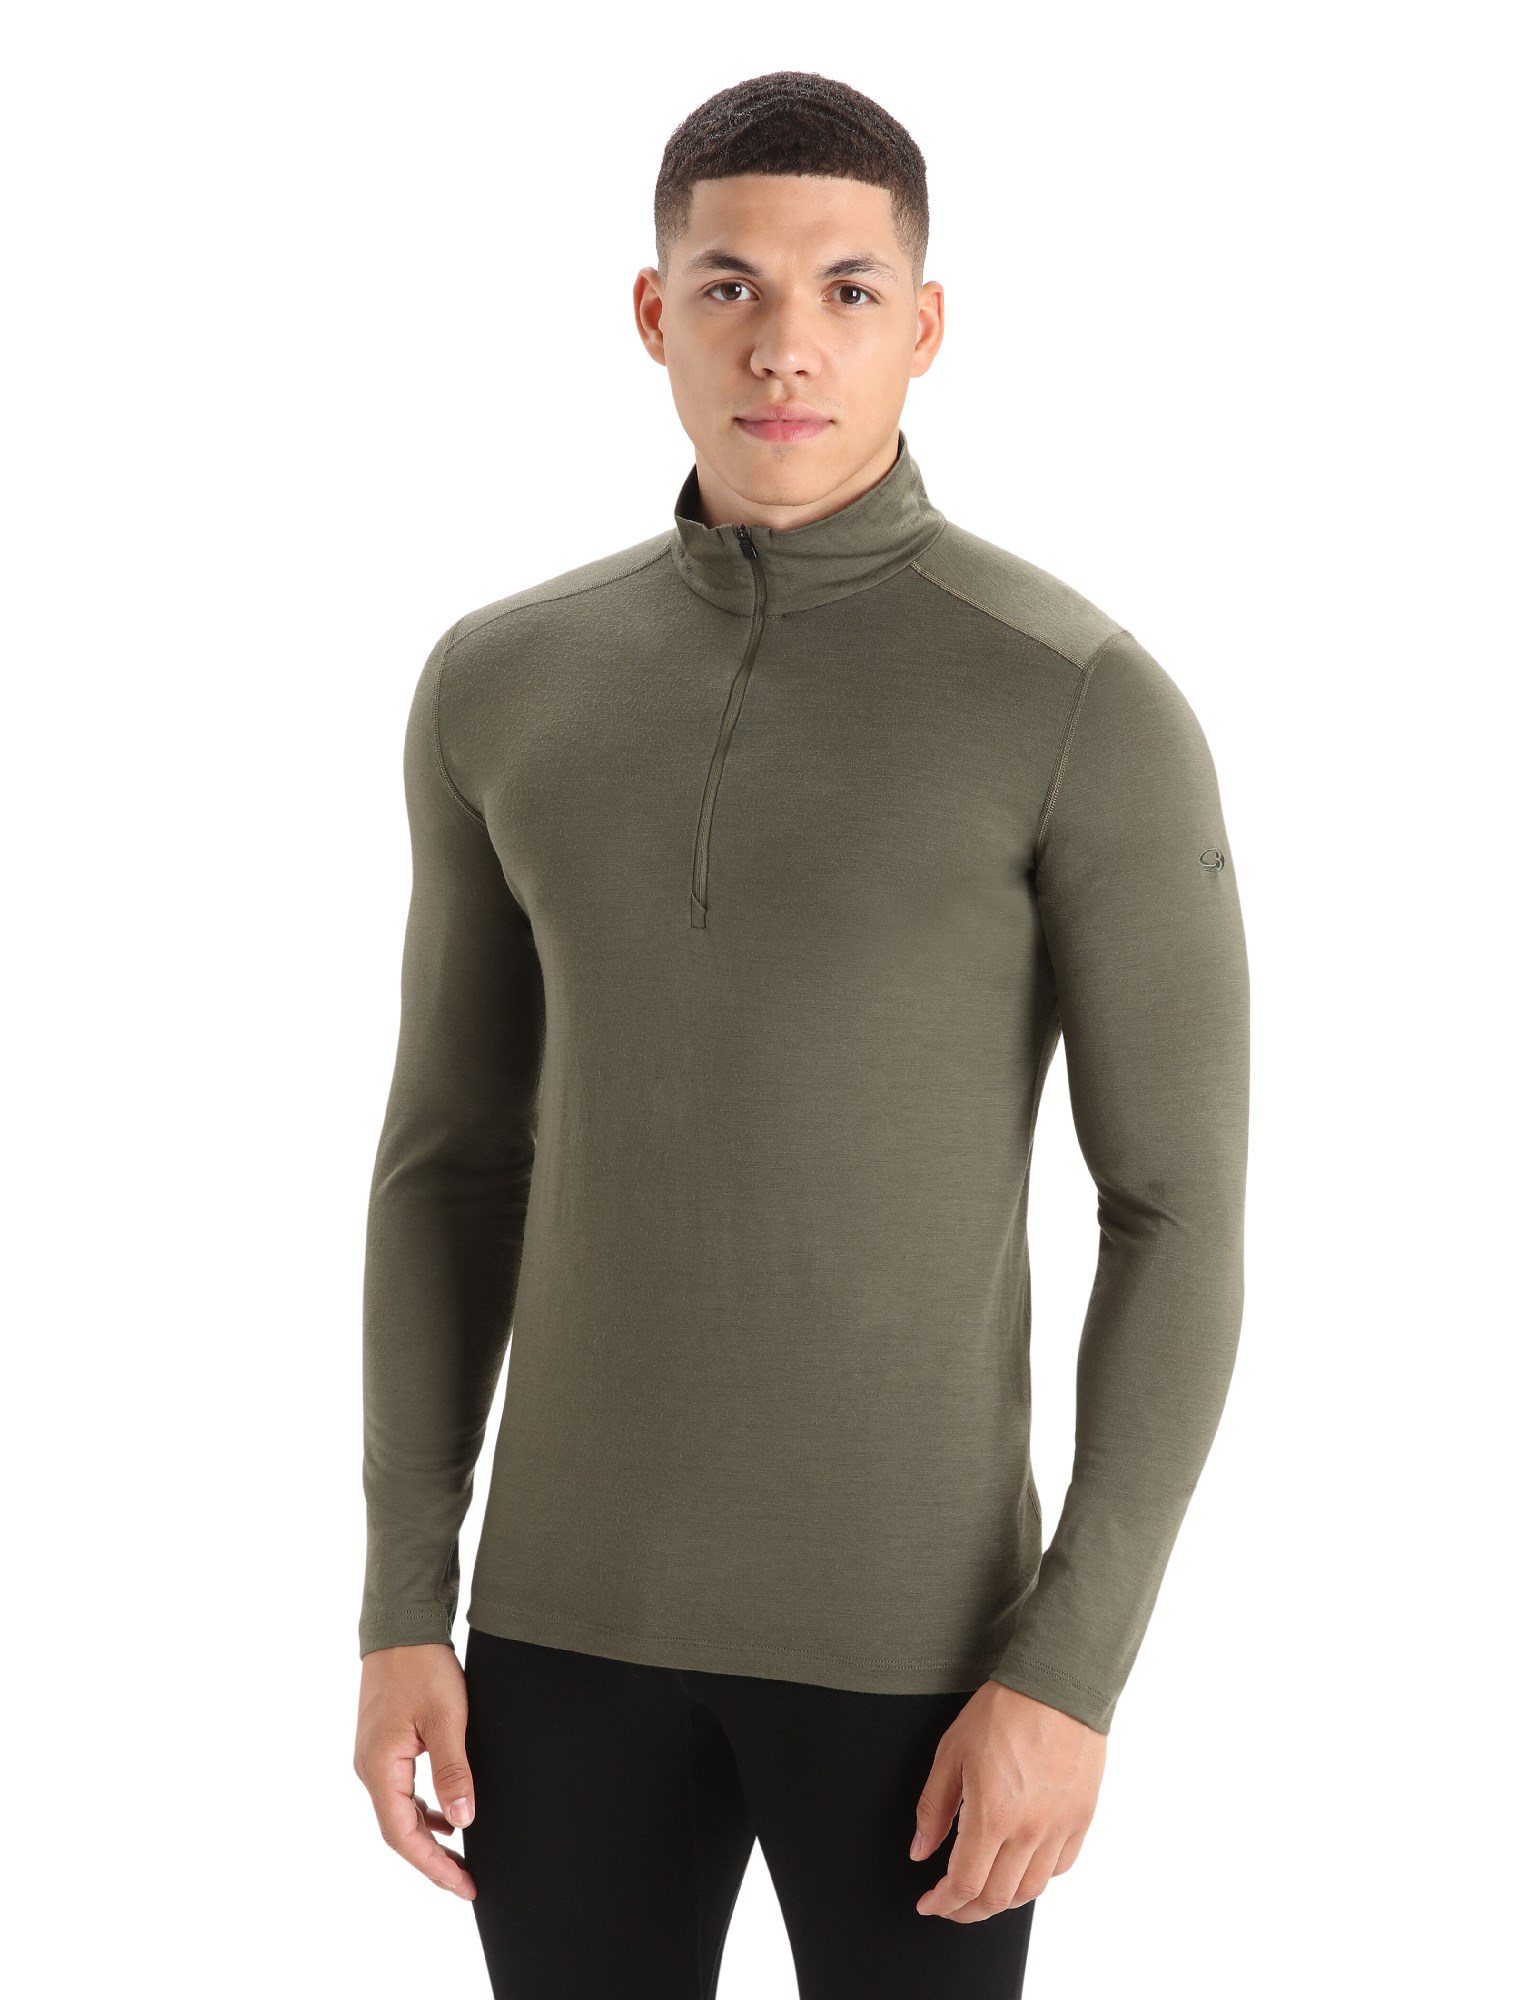 Icebreaker 200 Oasis Long Sleeve Half Zip Thermal Top - Men's , Up to 25%  Off with Free S&H — CampSaver